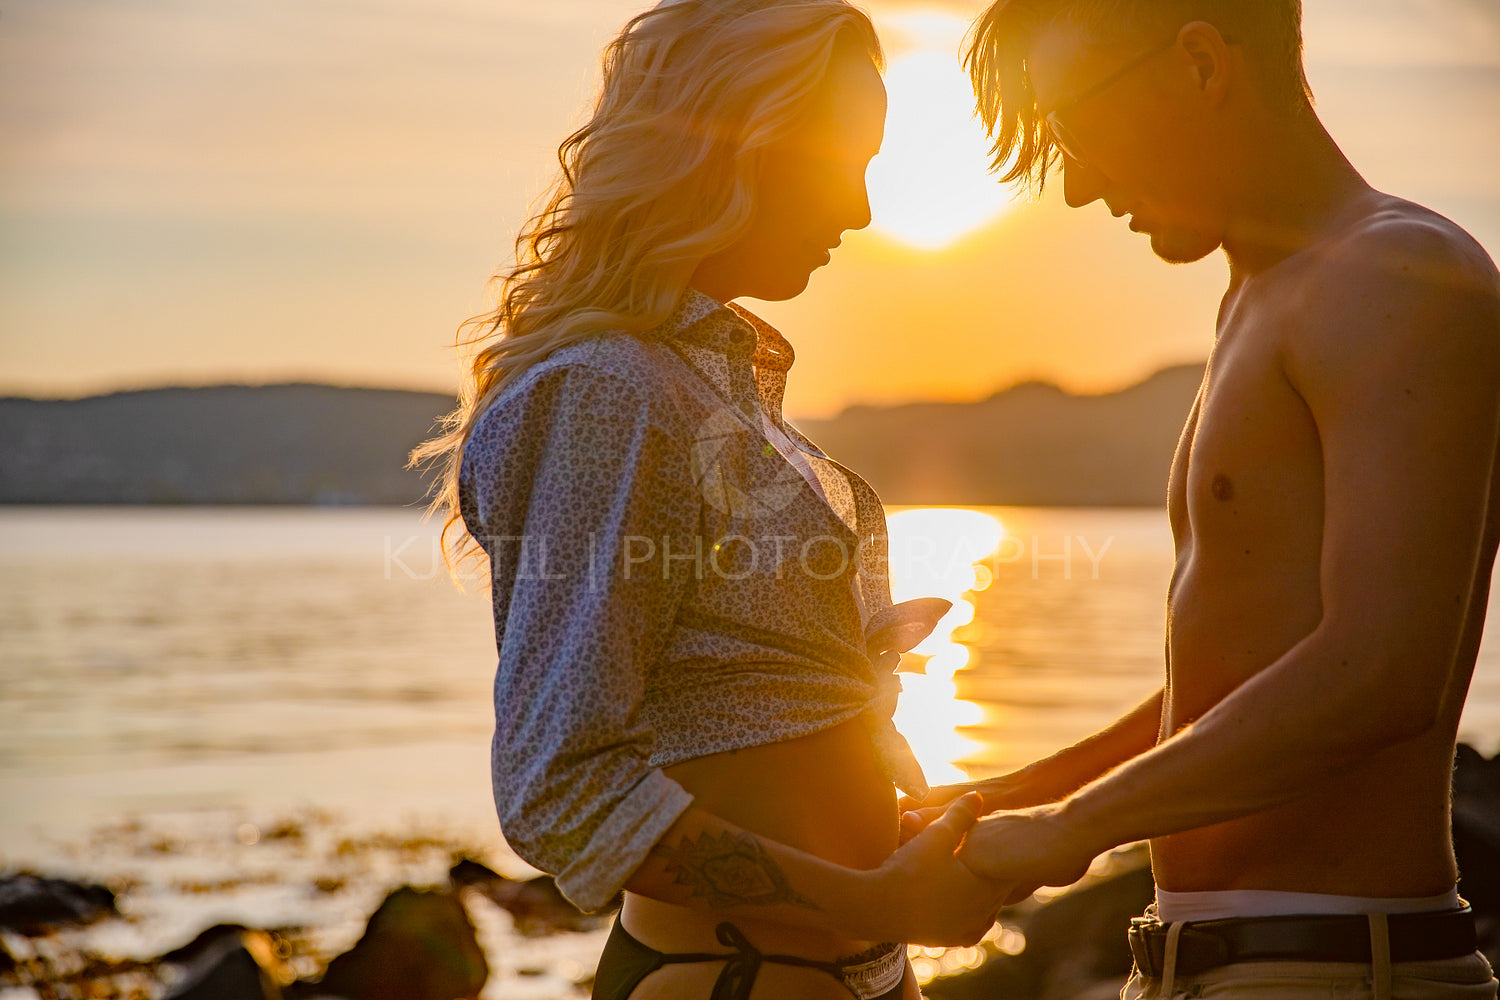 Silhouette of couple in love embracing at the beach against sun